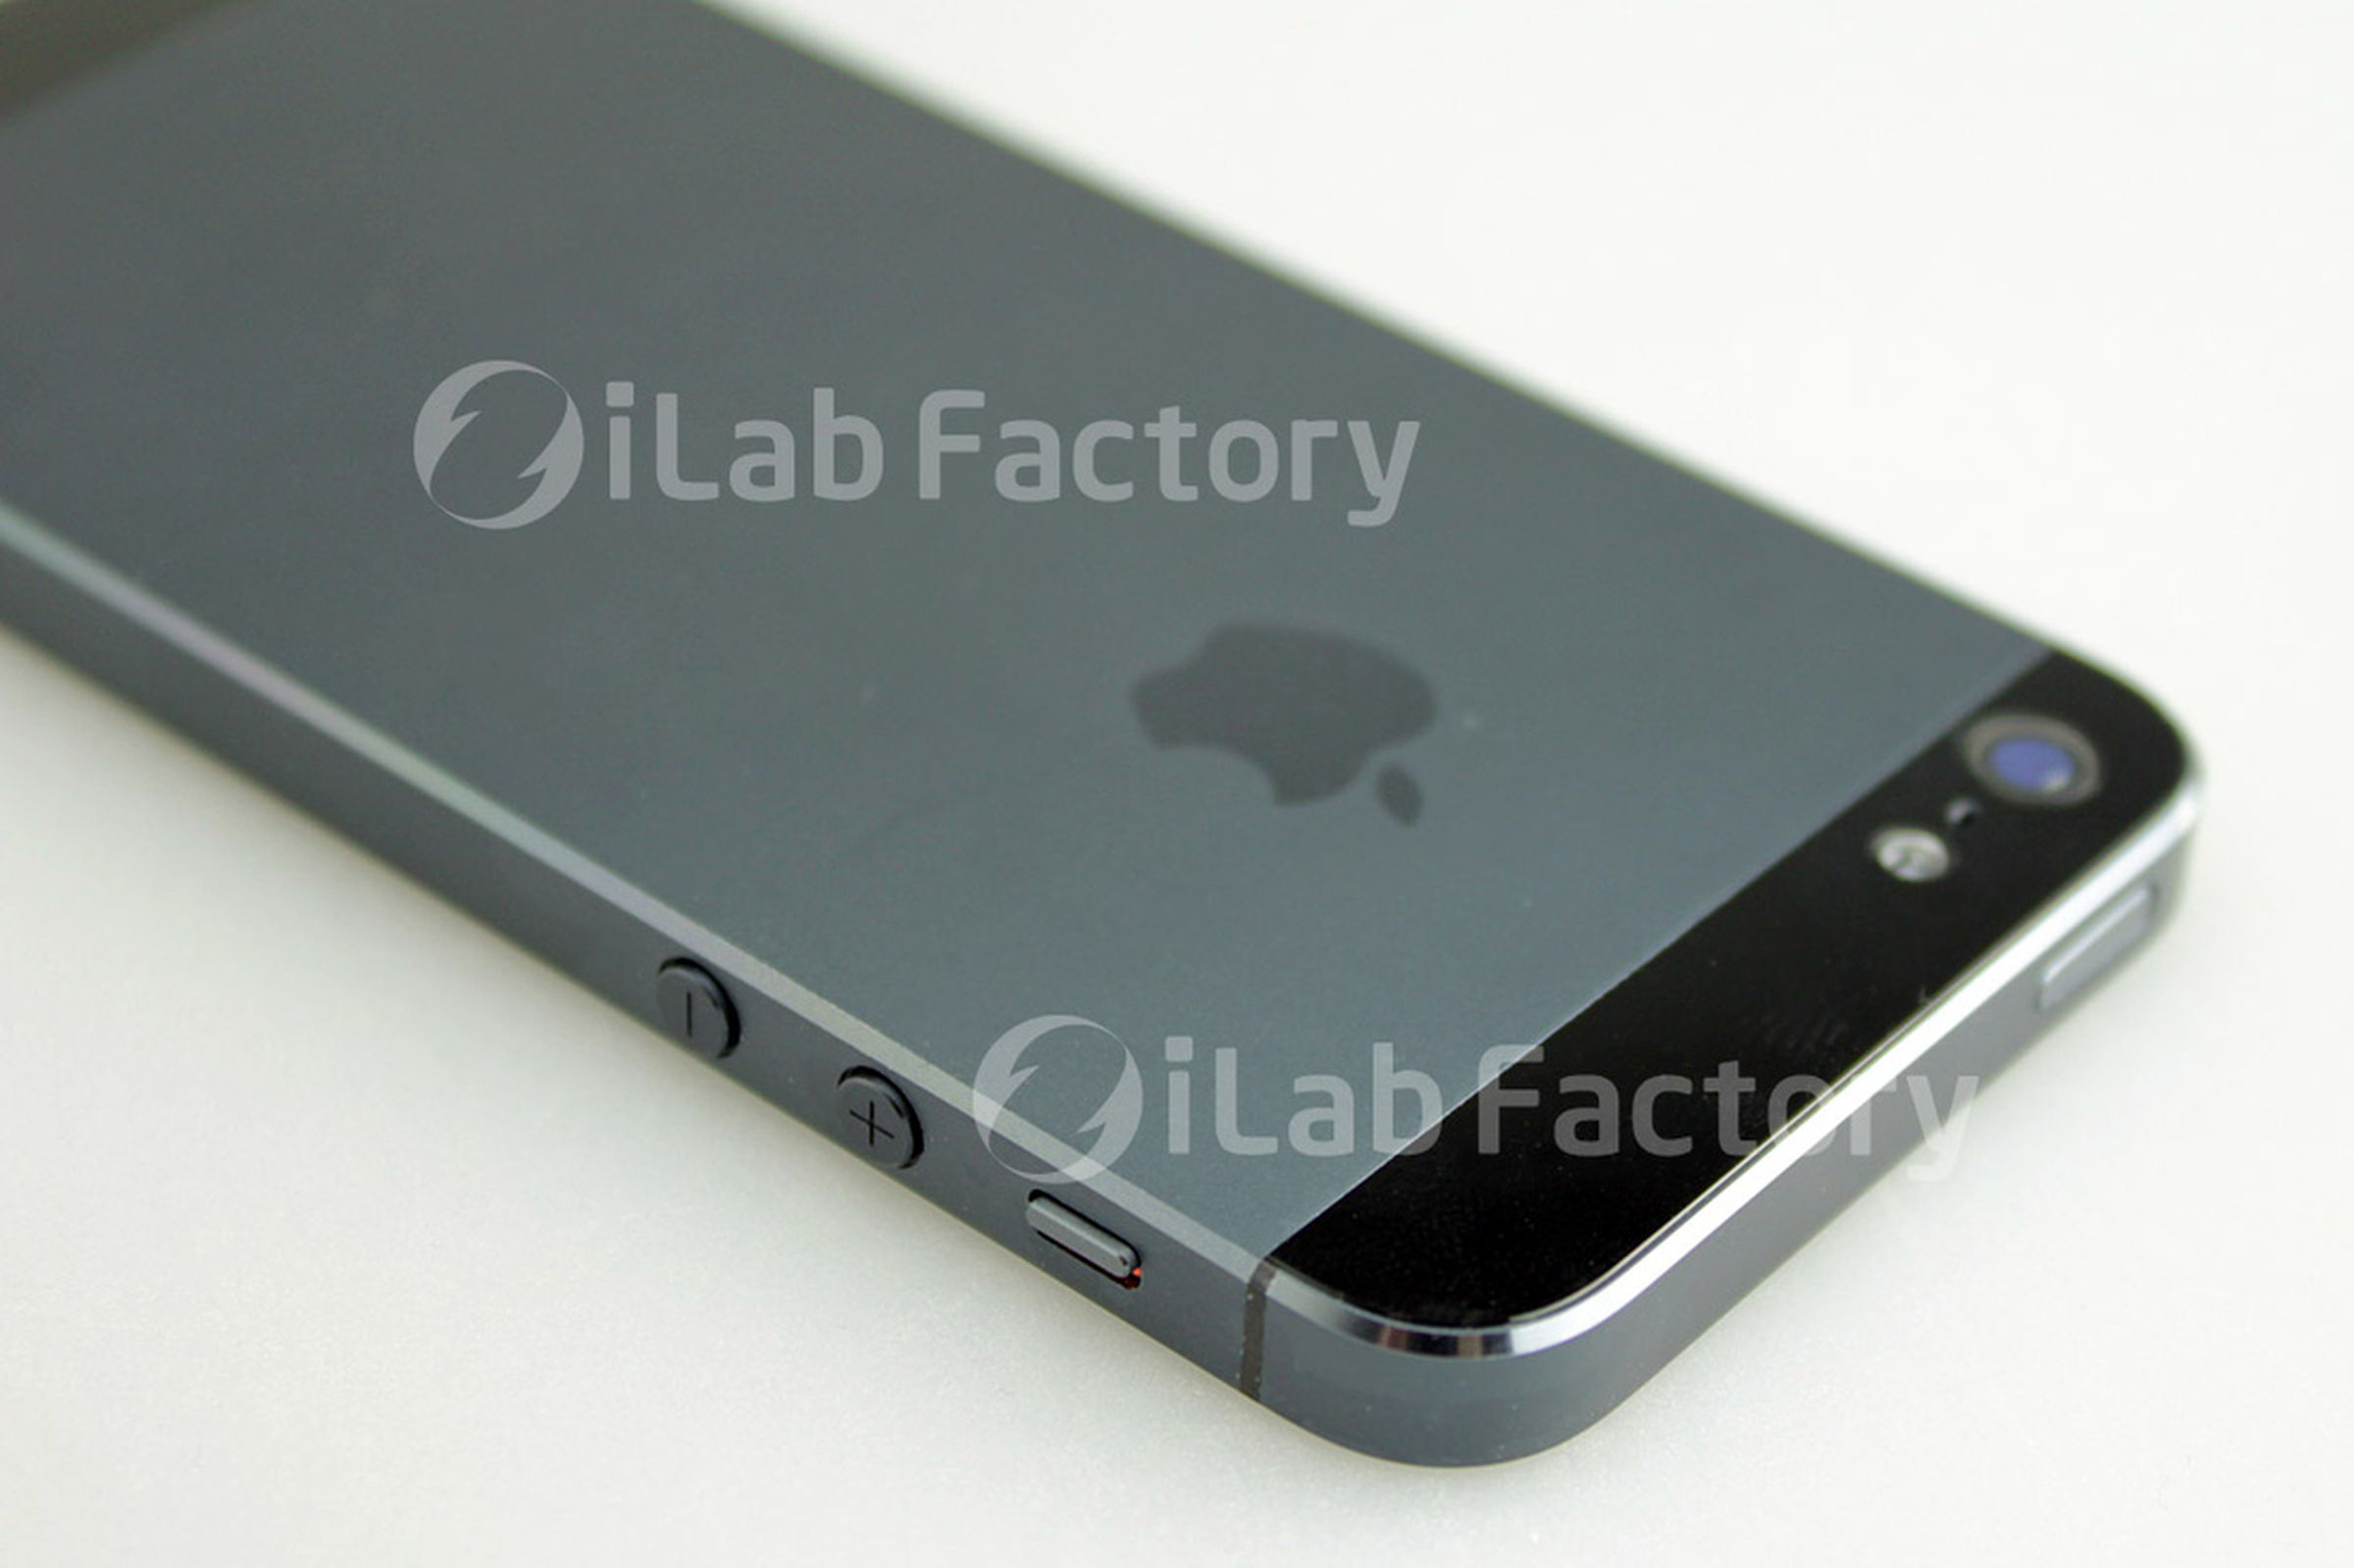 iLab Factory 'iPhone 5' pictures